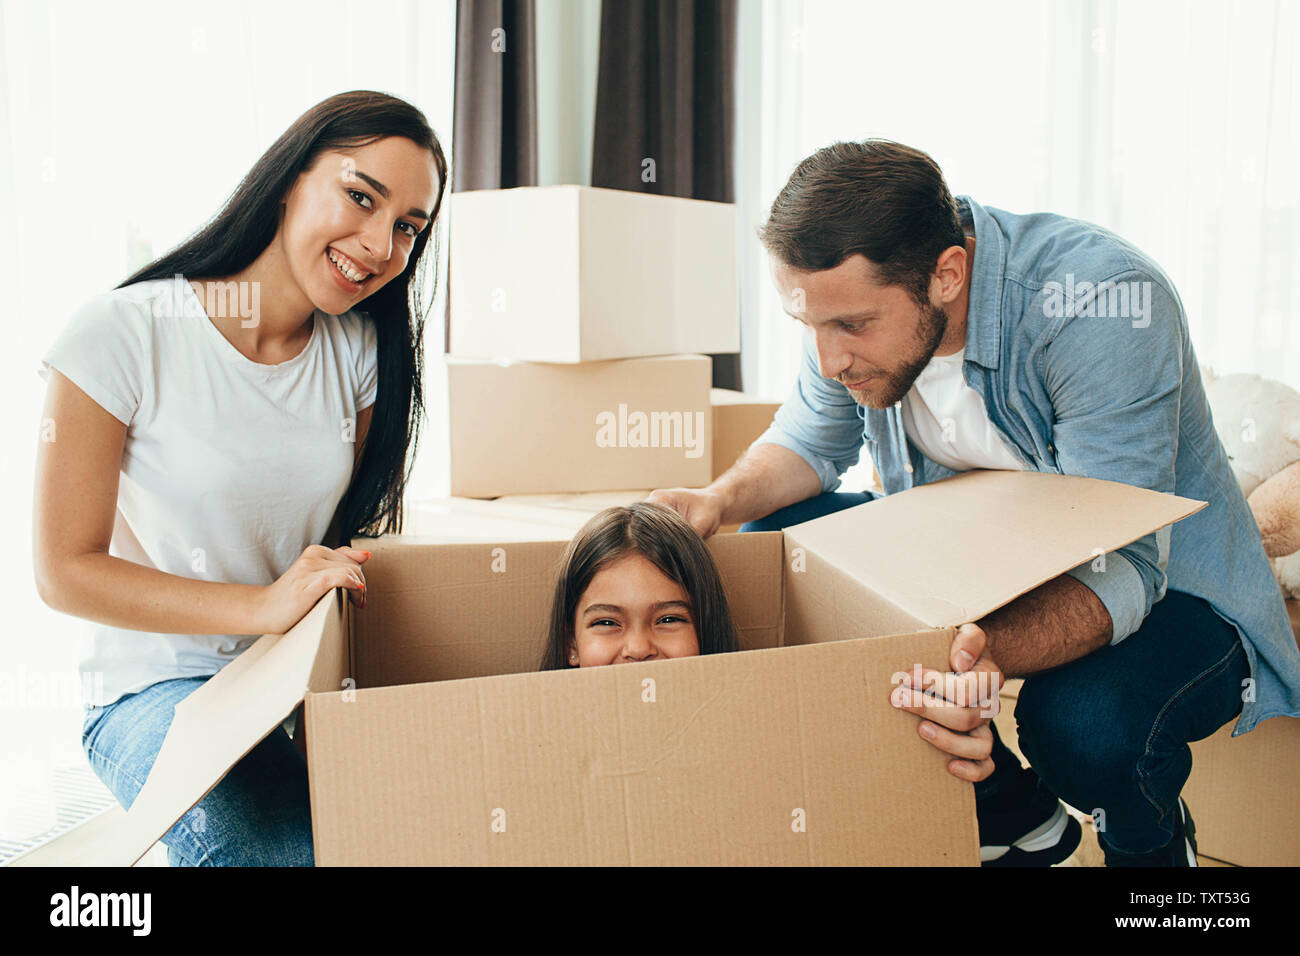 Happy family having fun while moving into new apartment. Mother, father and daughter together smiling, with Cardboard boxes on background Stock Photo